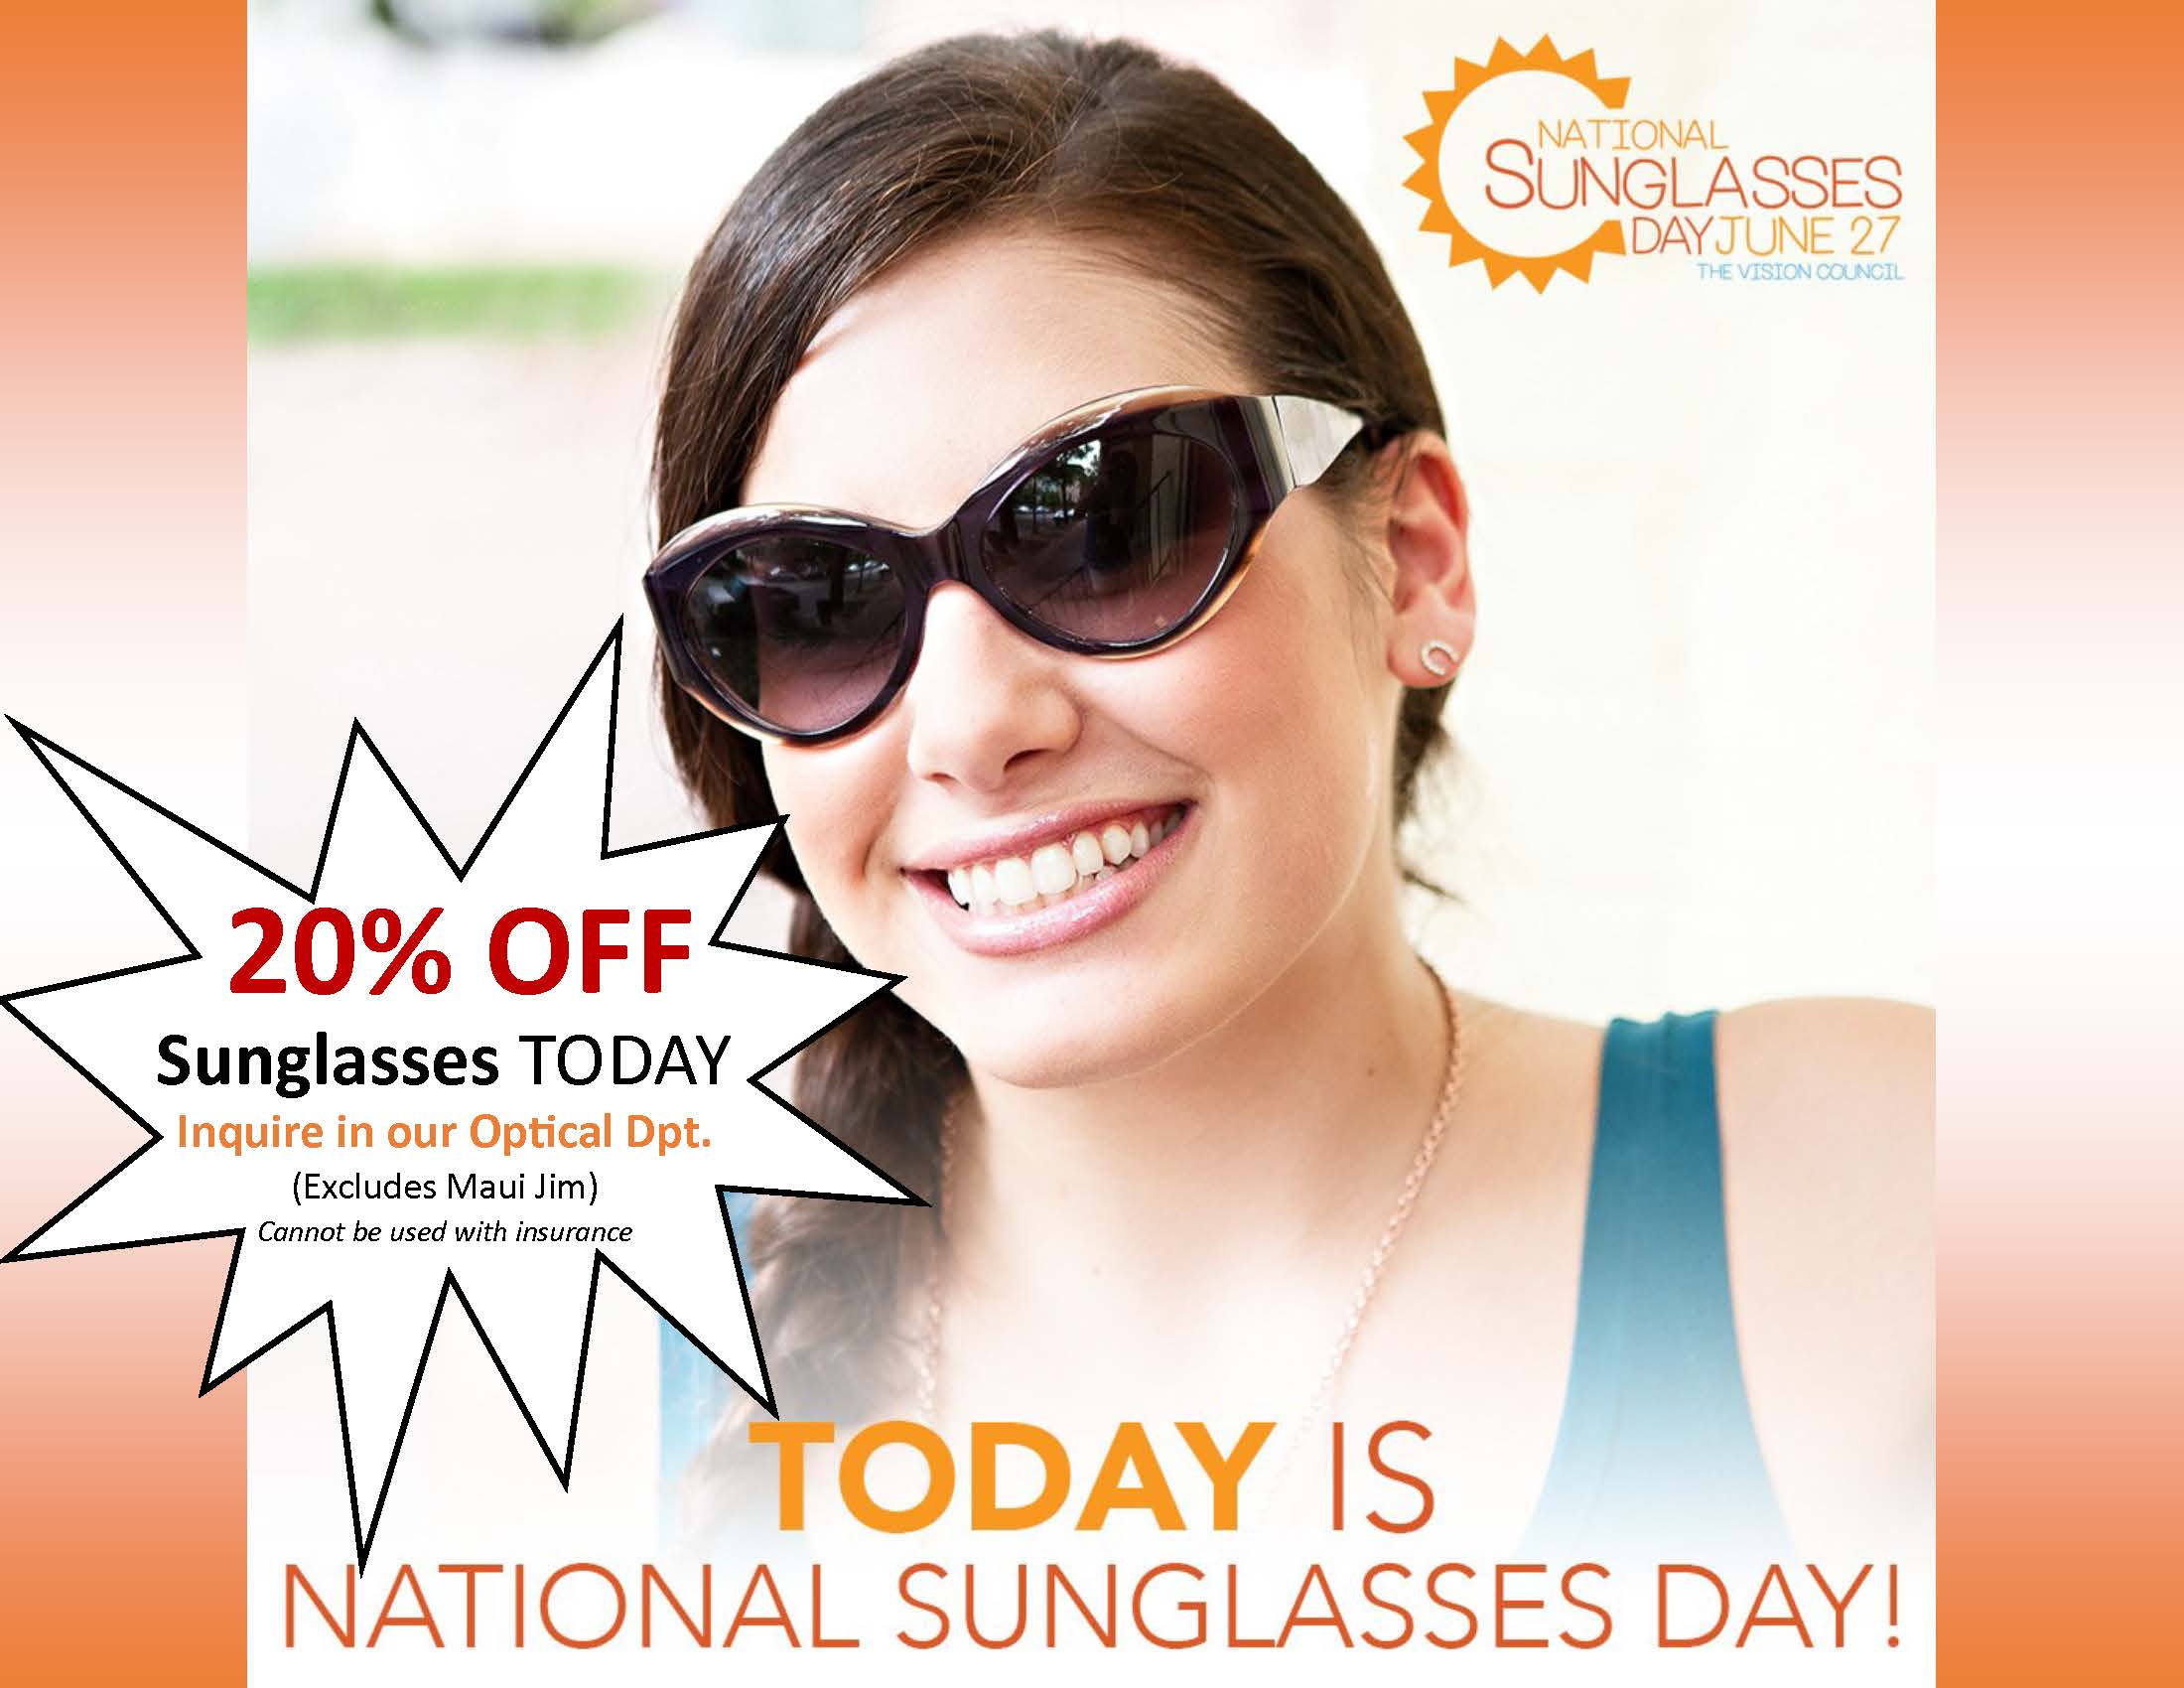 20% off on National Sunglasses Day!